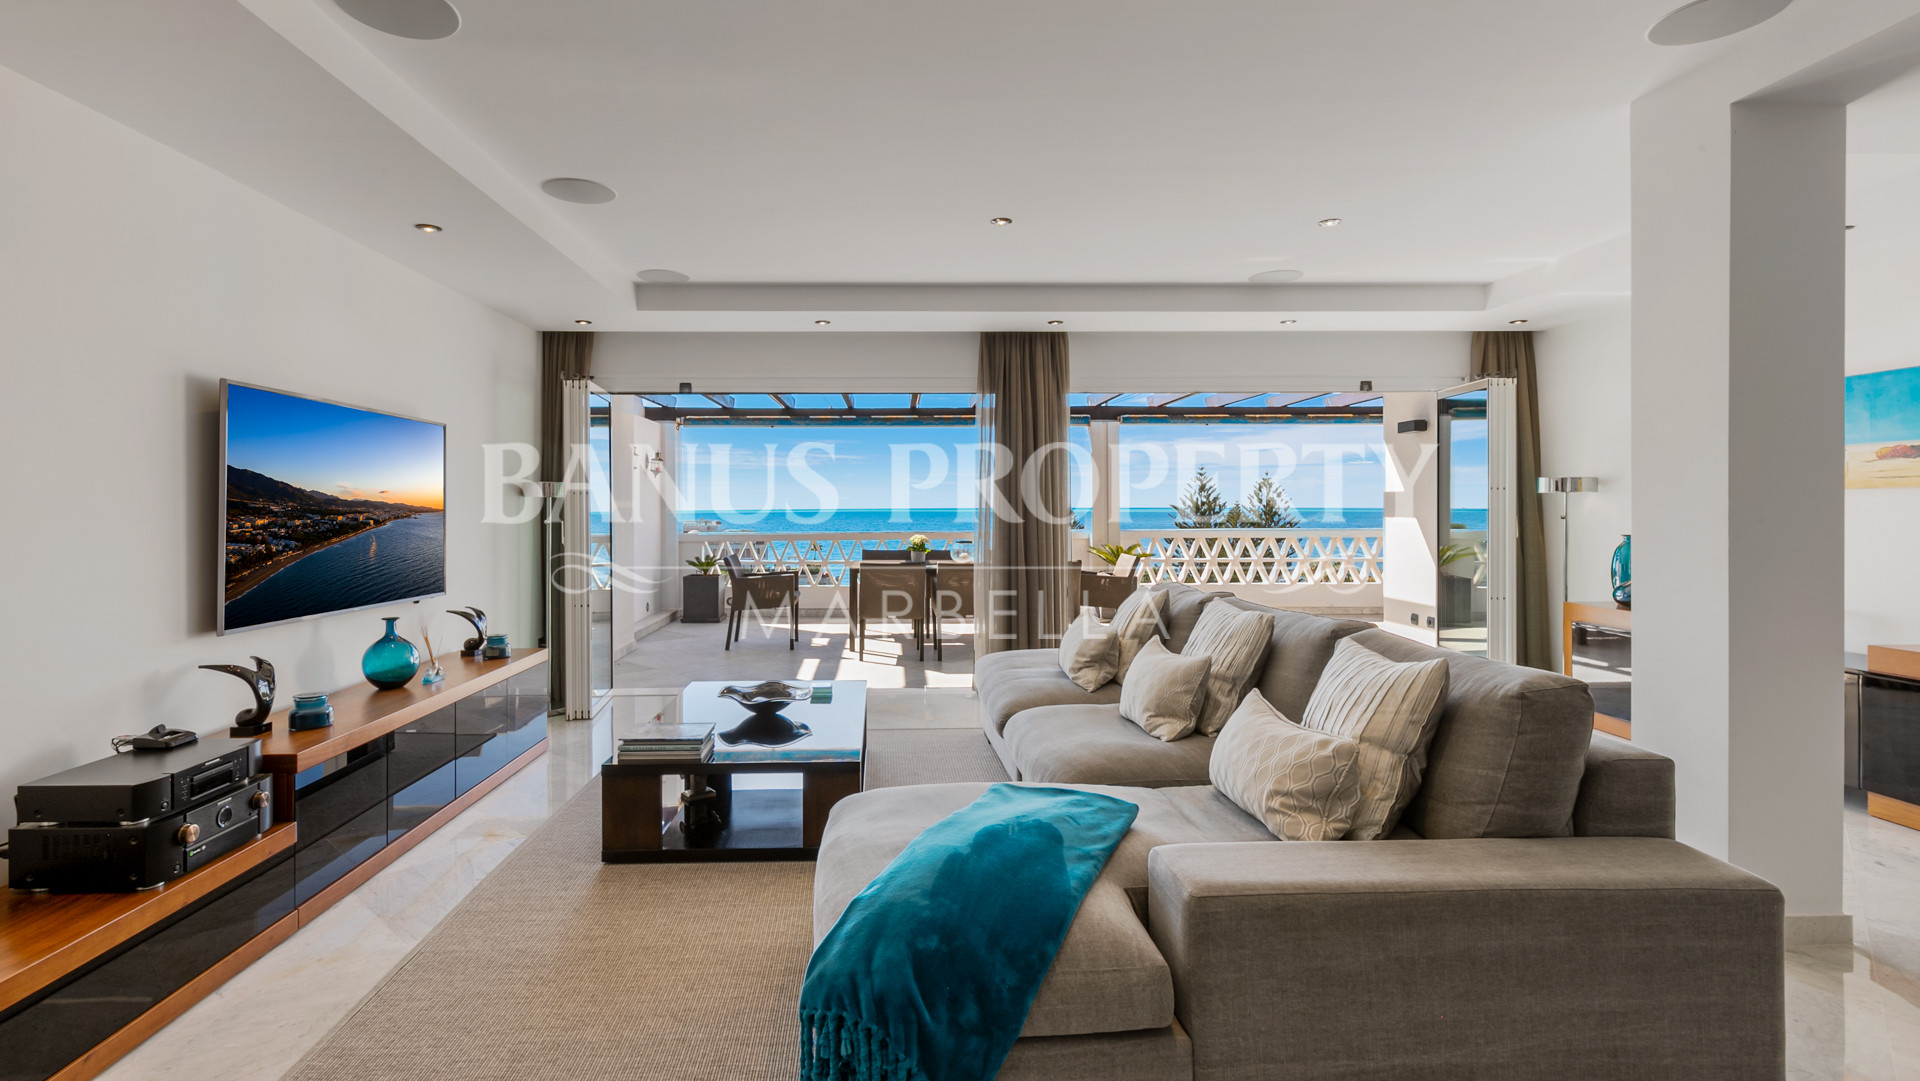 Your new life in Puerto Banus with dramatic sea views 